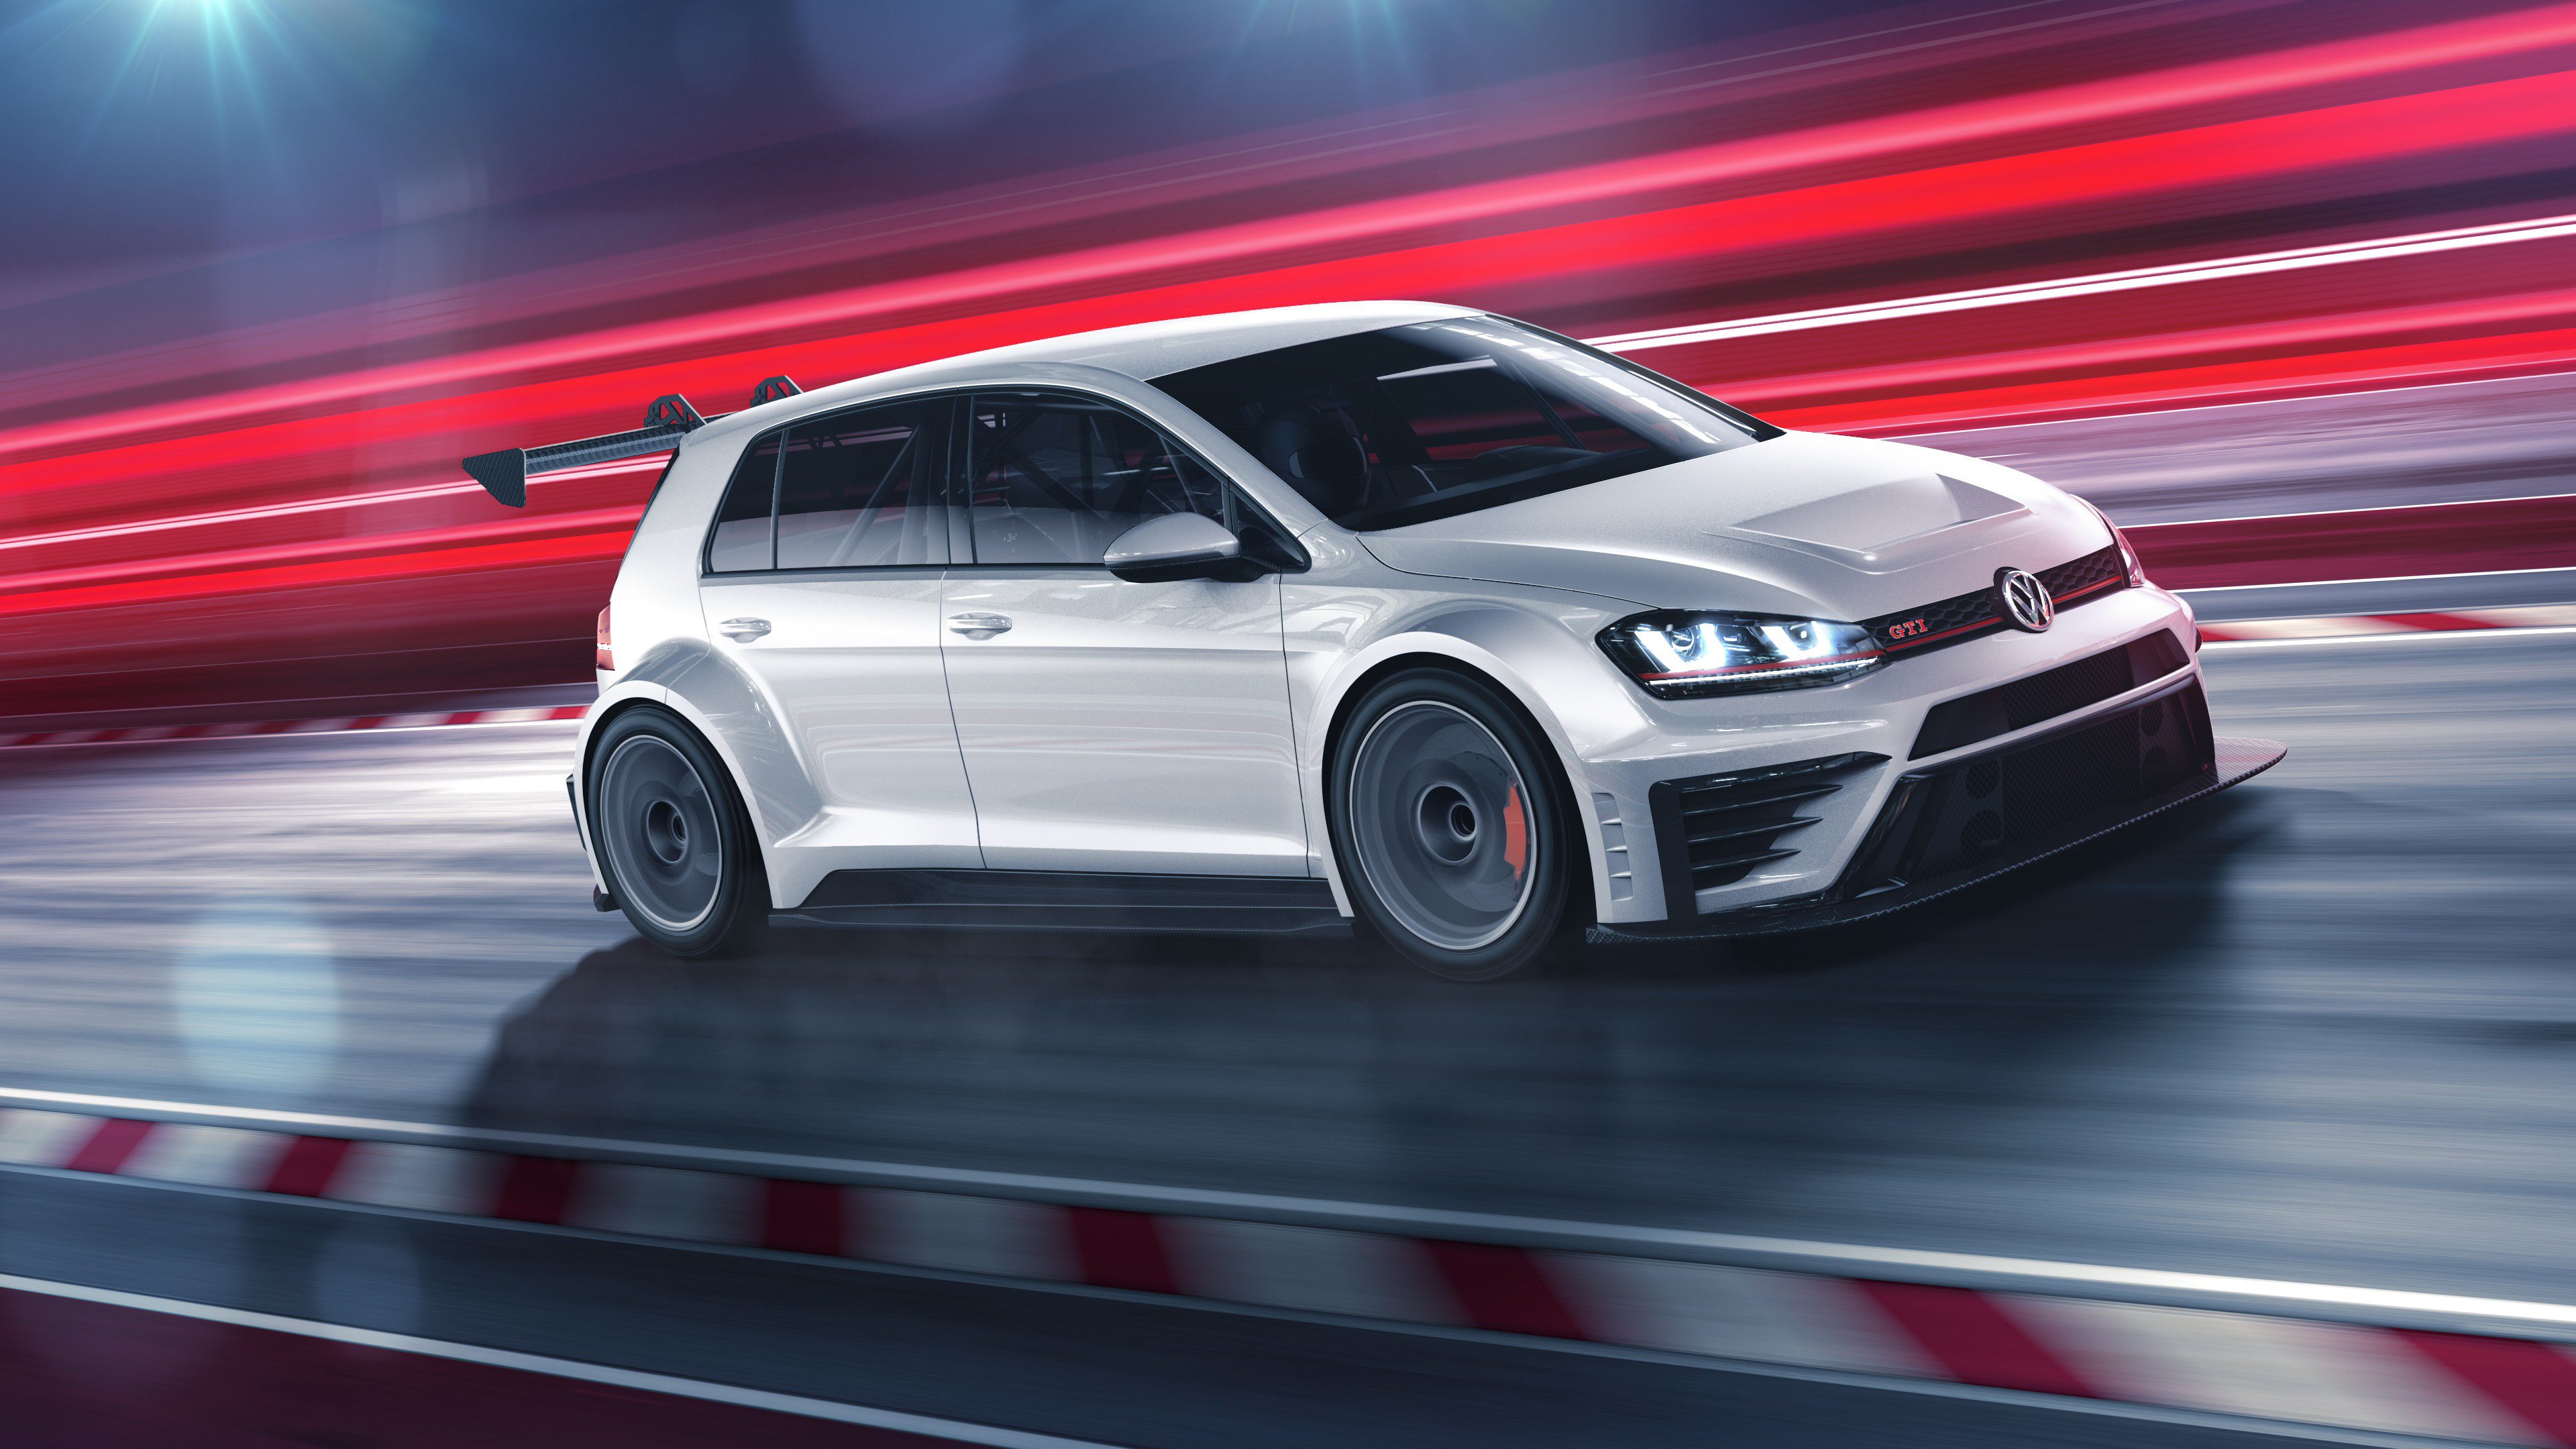 Volkswagen Golf GTI Wallpapers and Background Images   stmednet